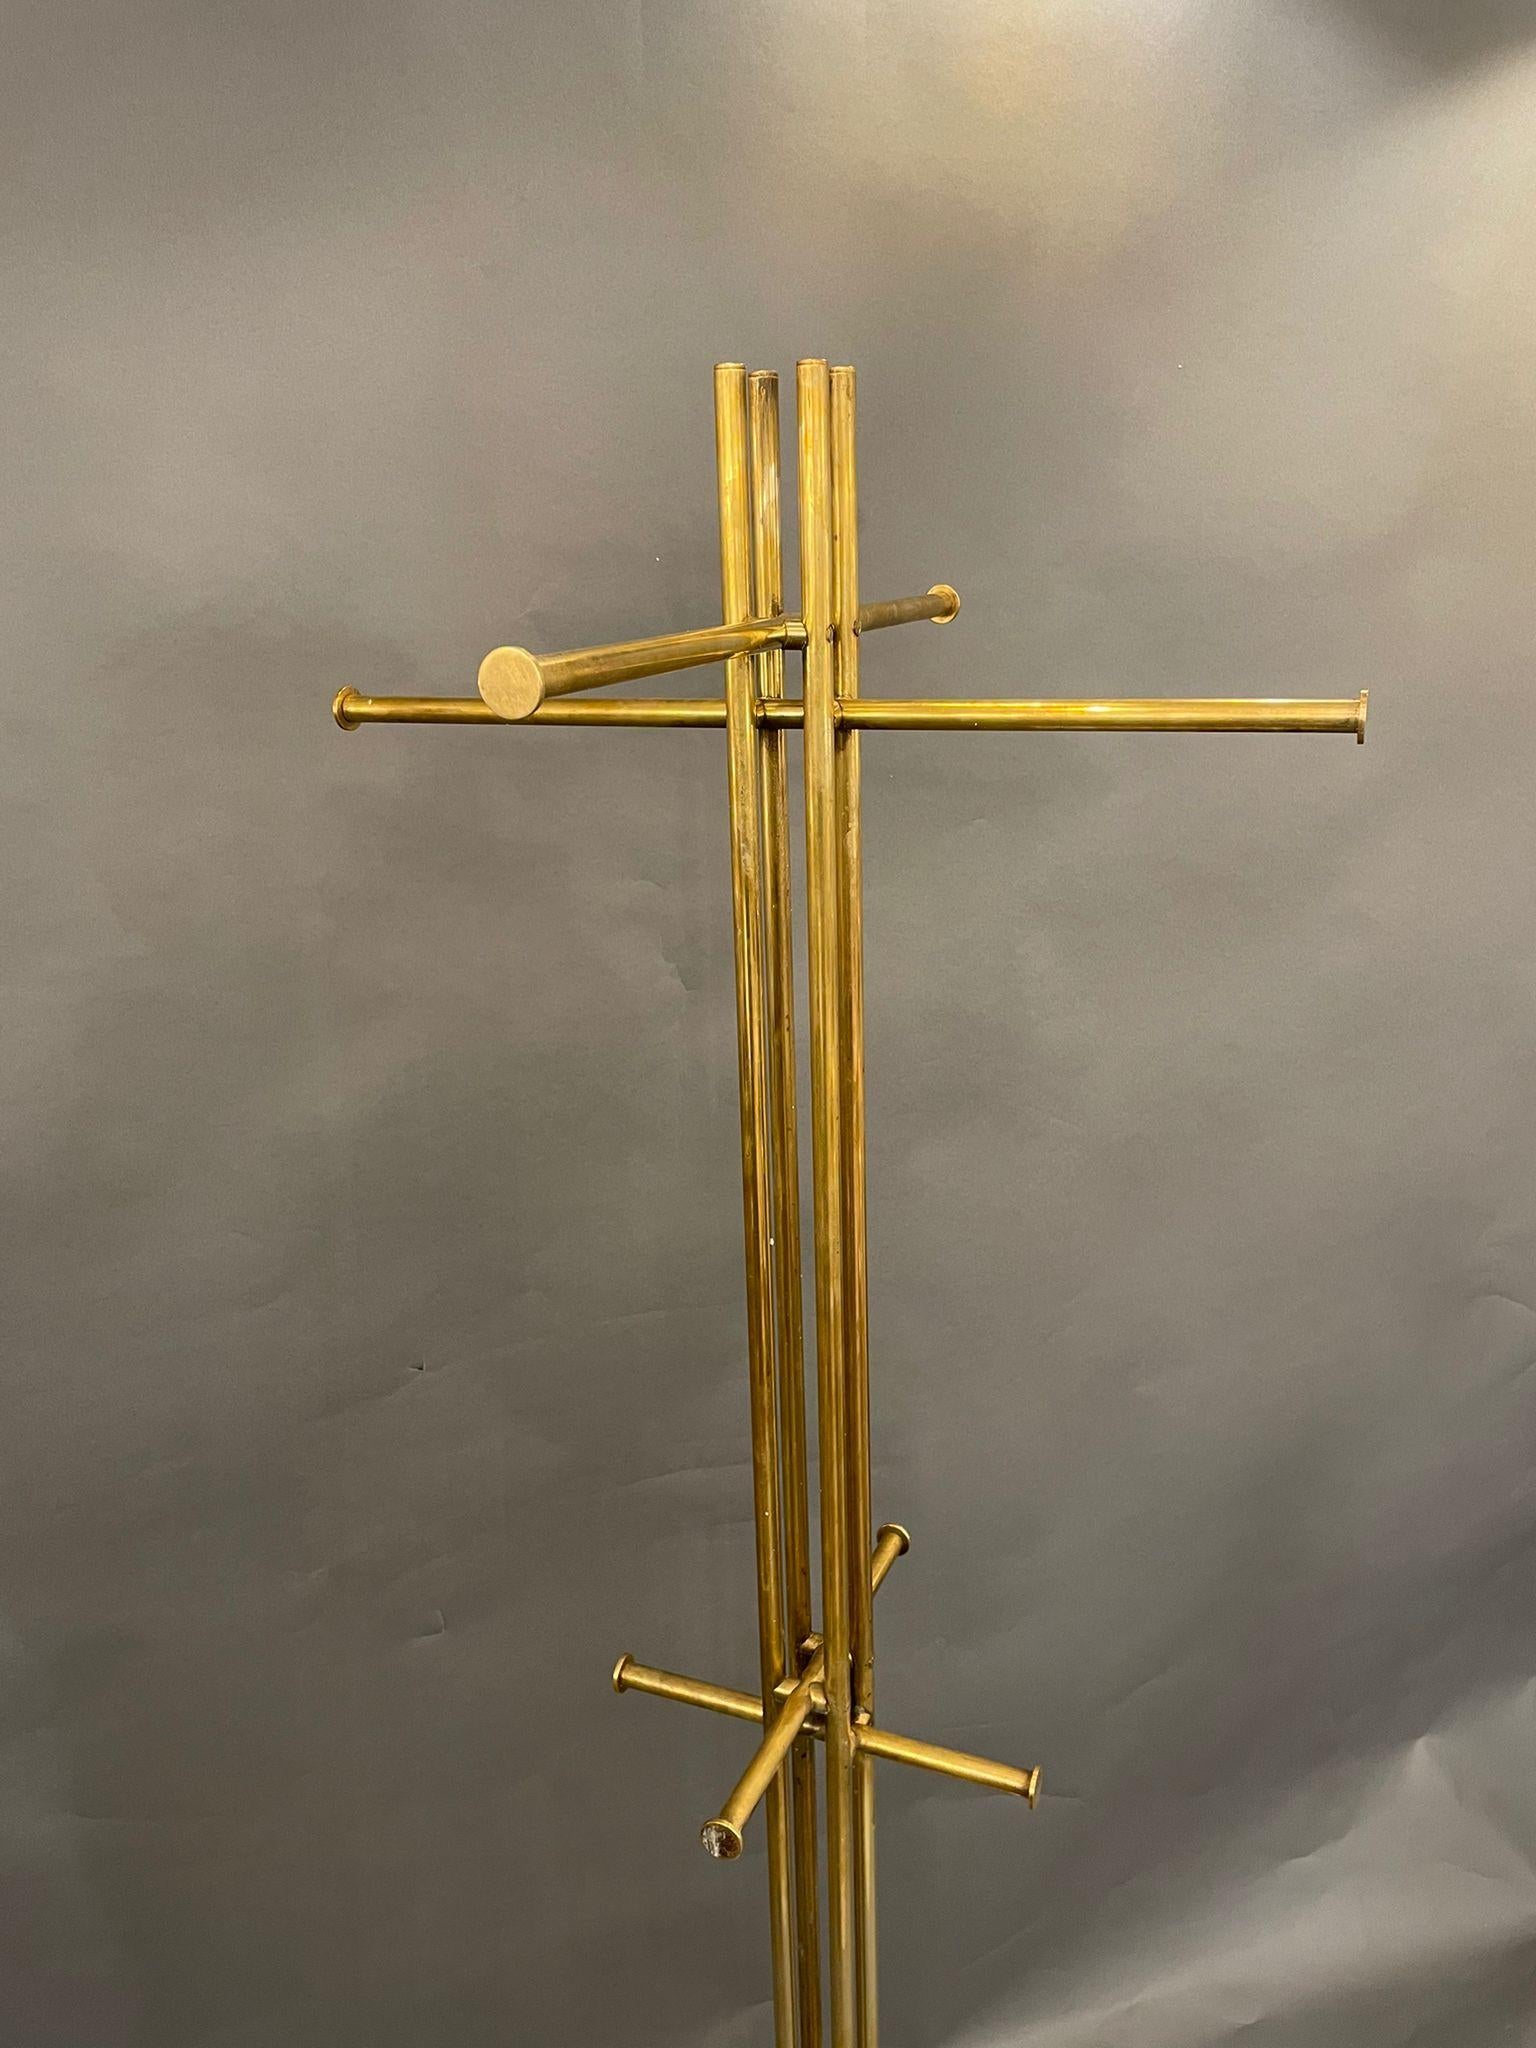 Mid-20th Century Italian Coat Stand in Brass with Carrara Marble Base, circa 1960s For Sale